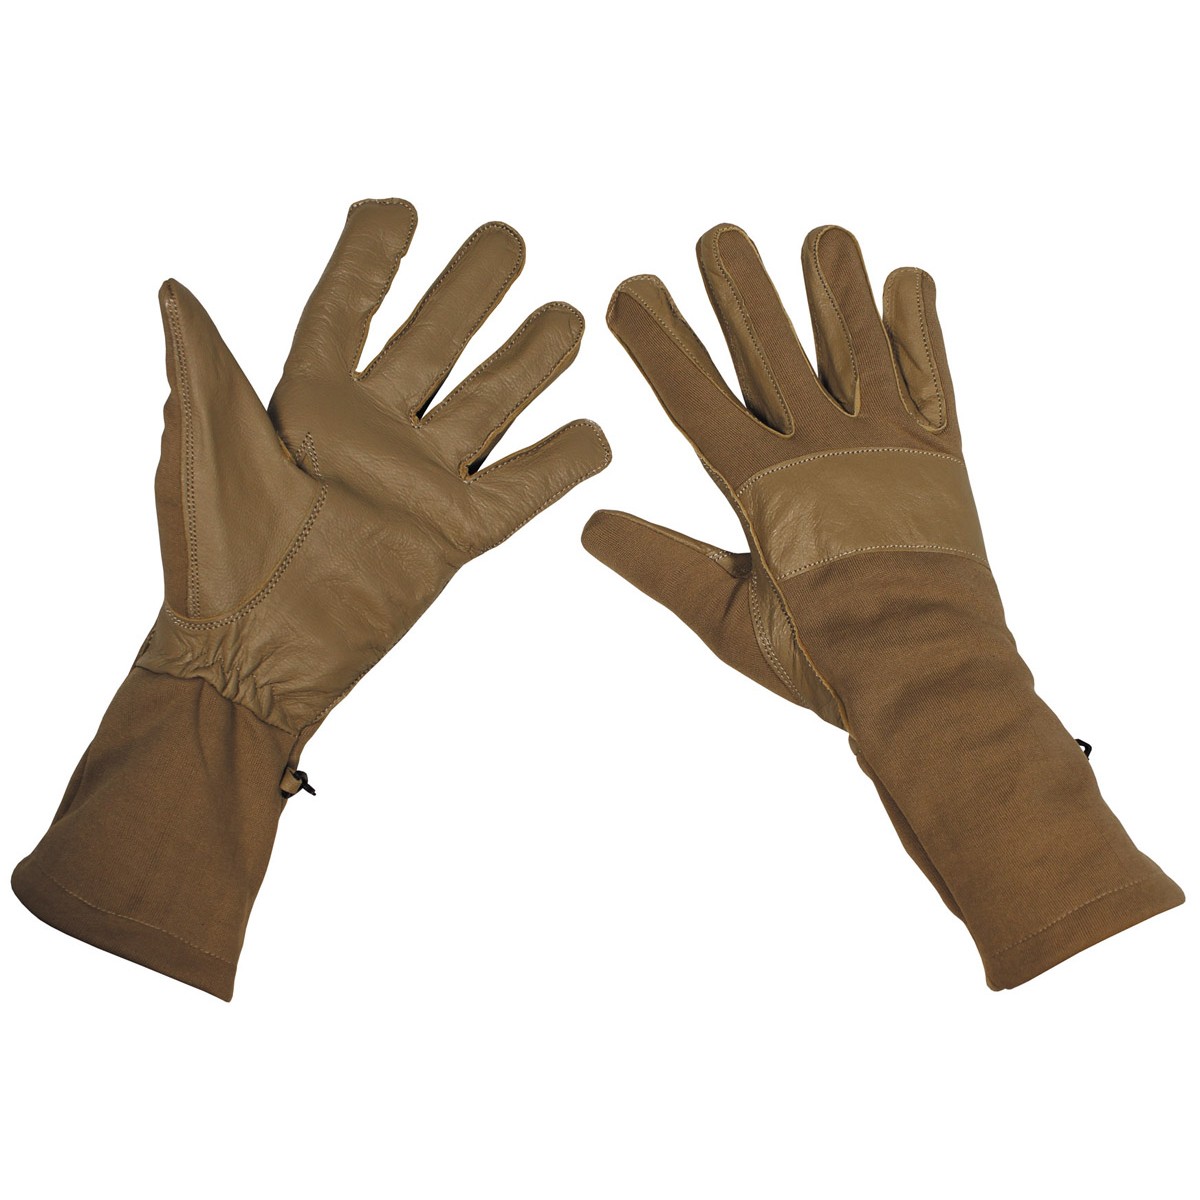 BW German Army Combat Gloves Long Gaiter Leather Trim - Coyote